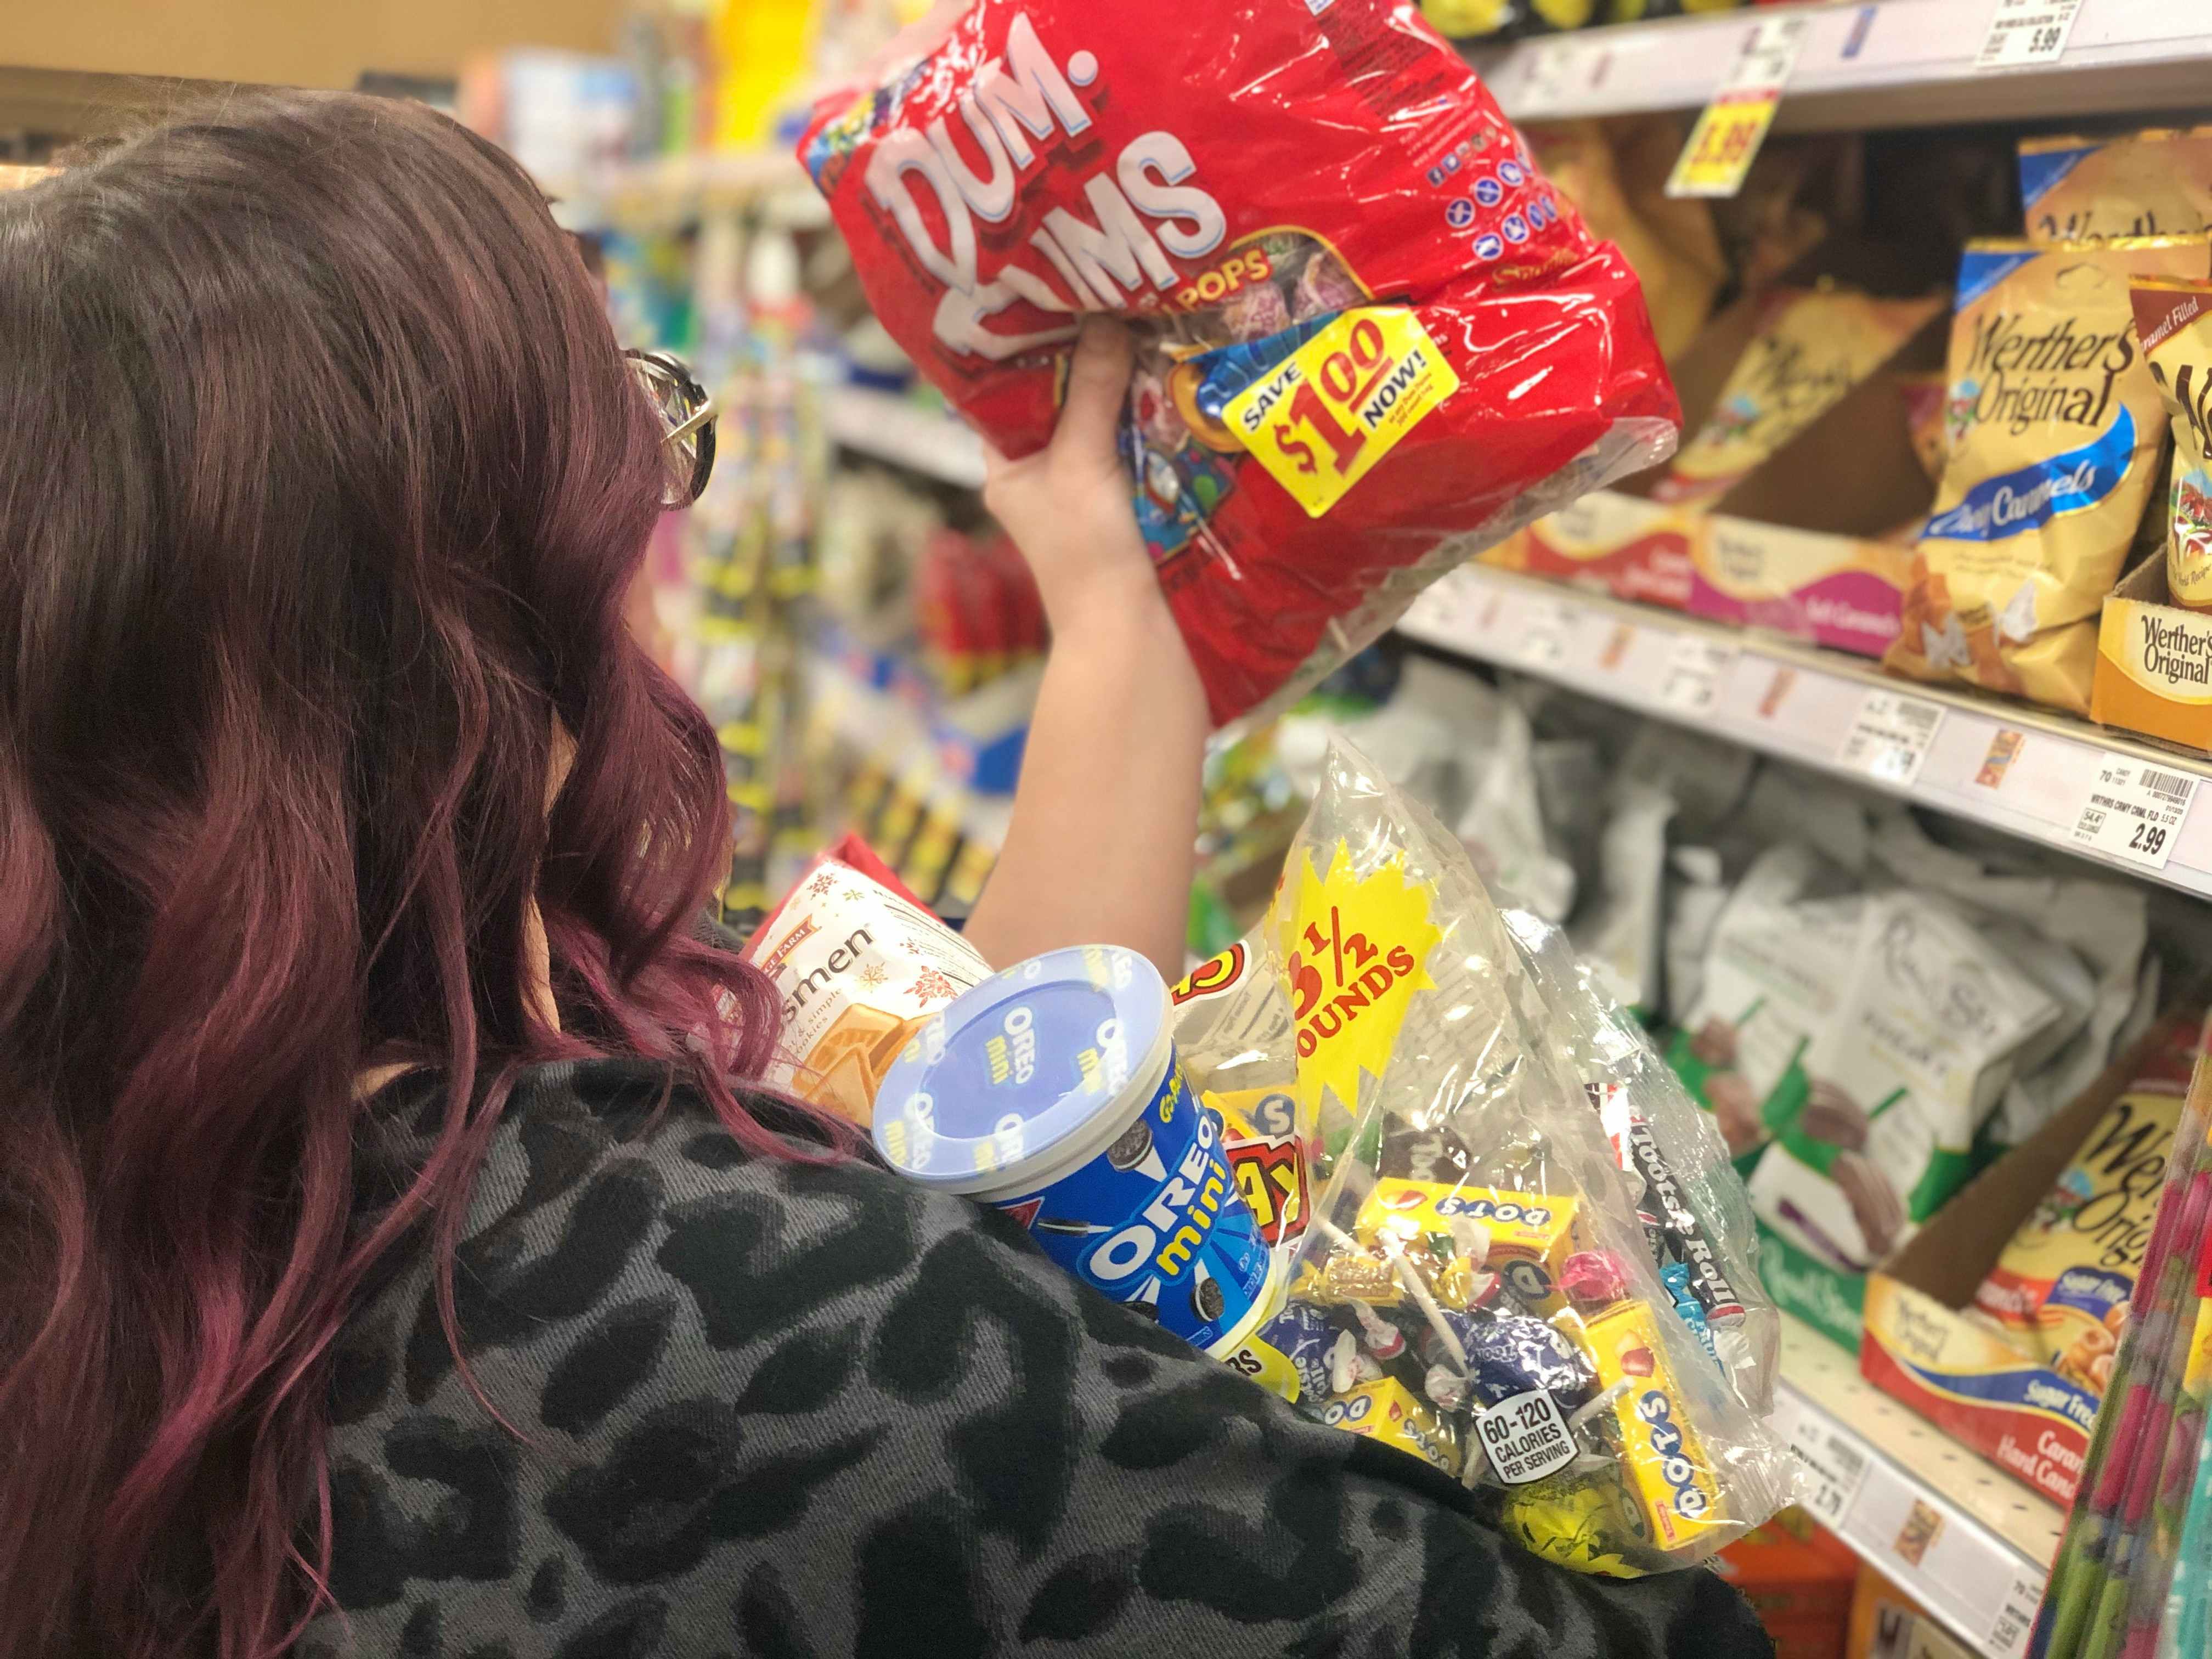 A woman grabs armfuls of candy.